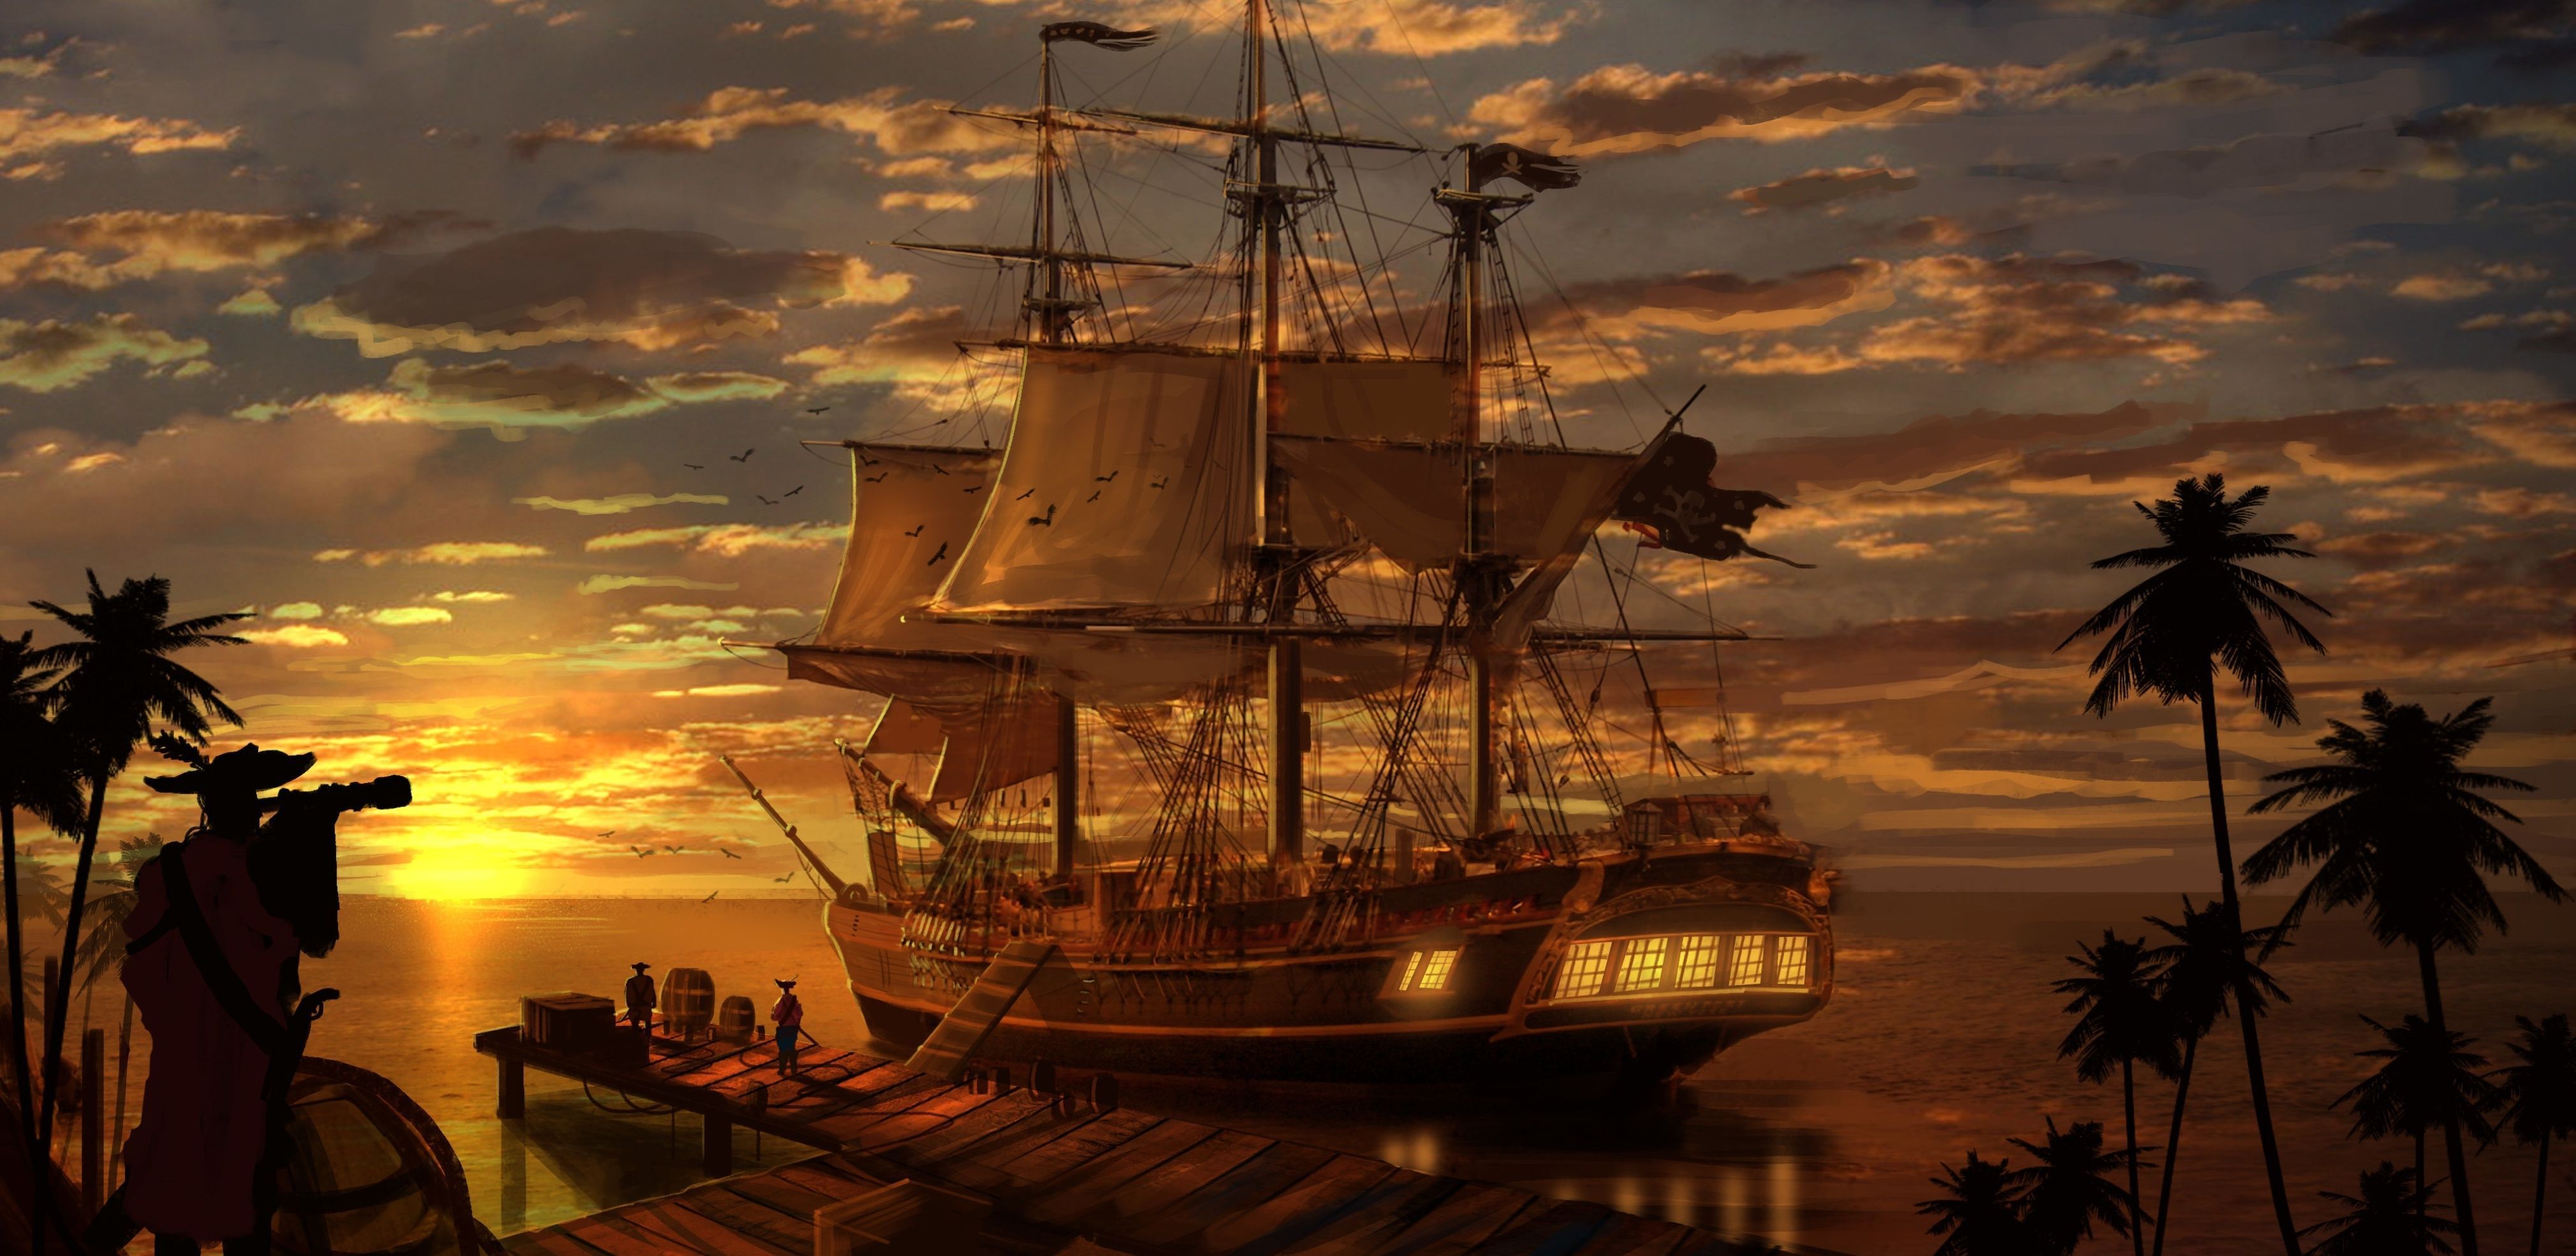 117 Pirate HD Wallpapers | Backgrounds - Wallpaper Abyss